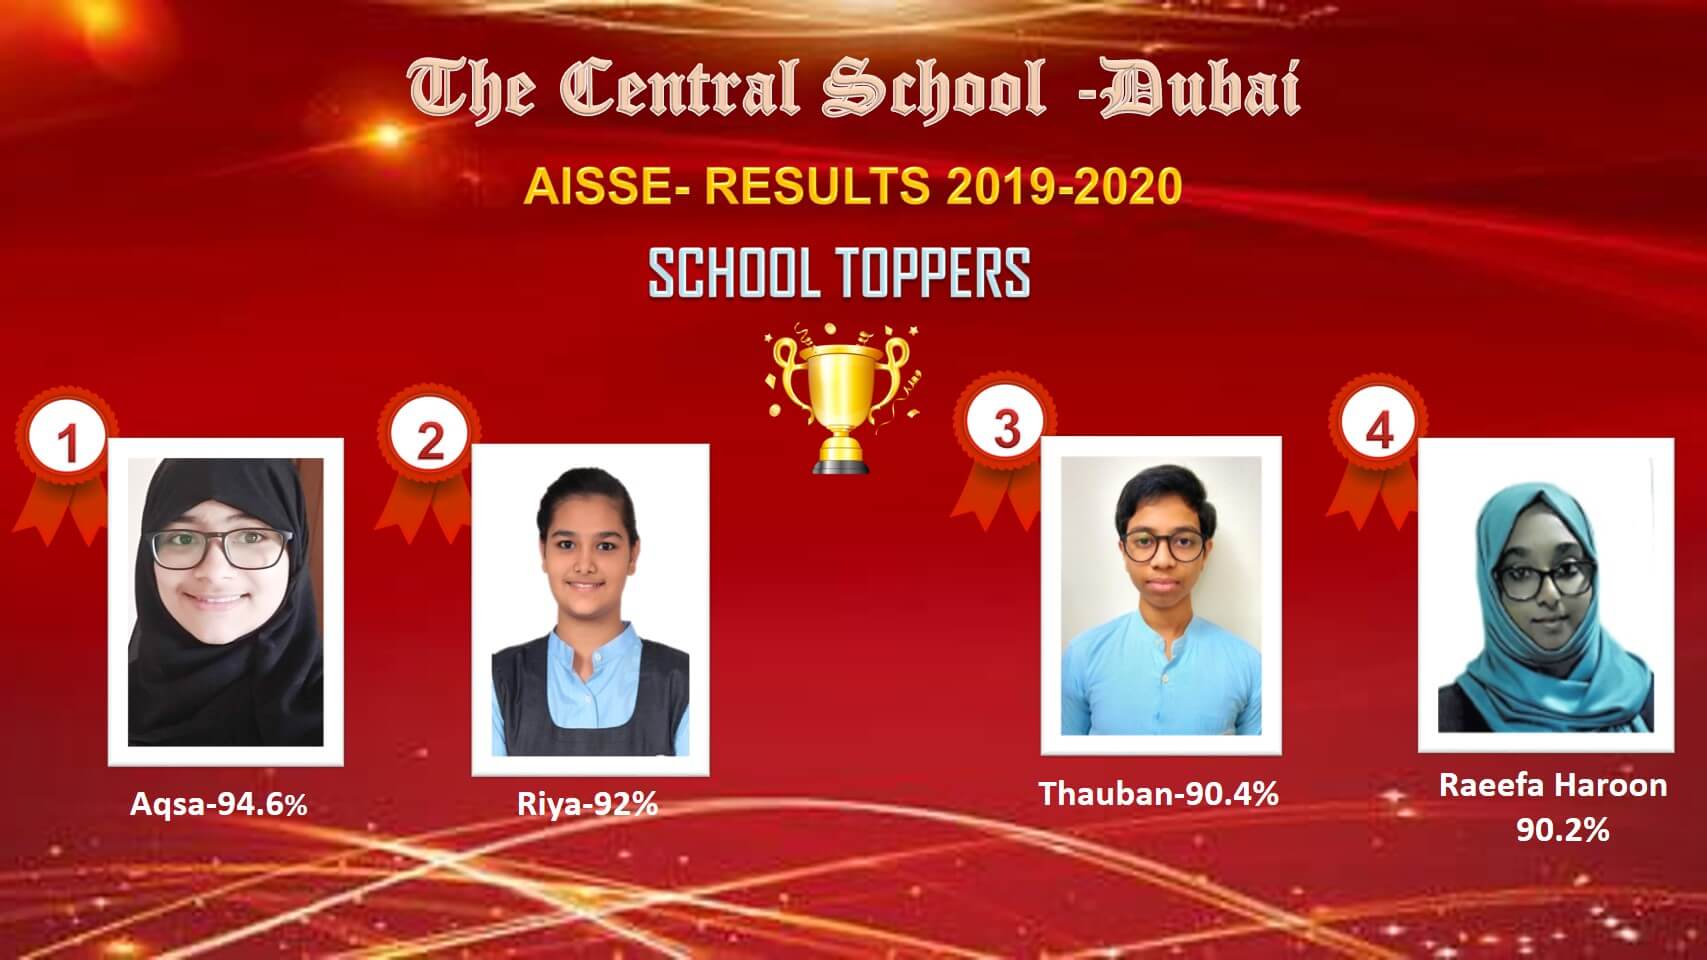 TCS- AISSE RESULTS 2019-20